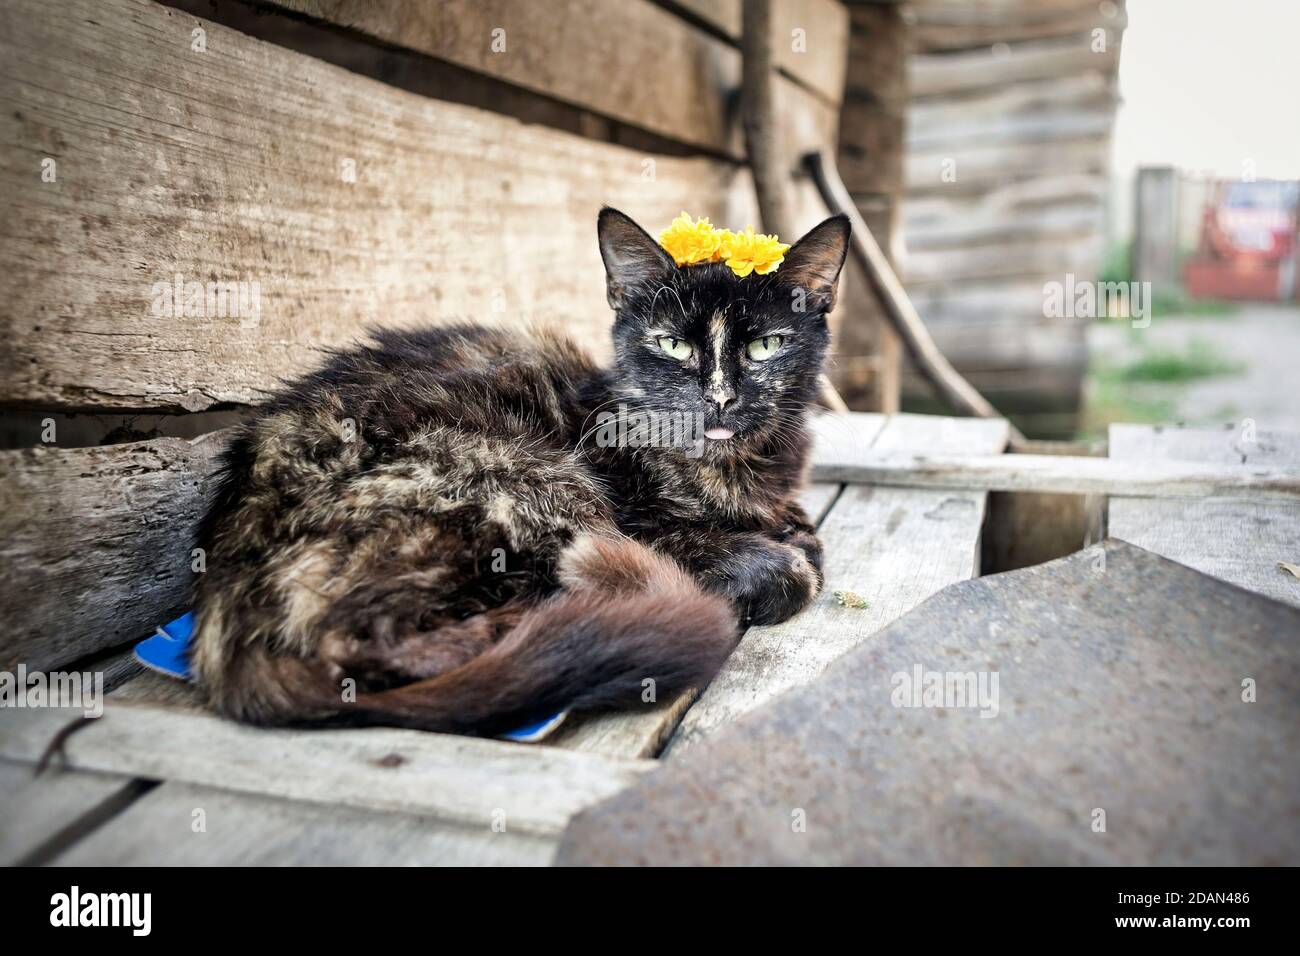 Old tufted cat looking funny with tongue out and yellow flowers on her head. Stock Photo